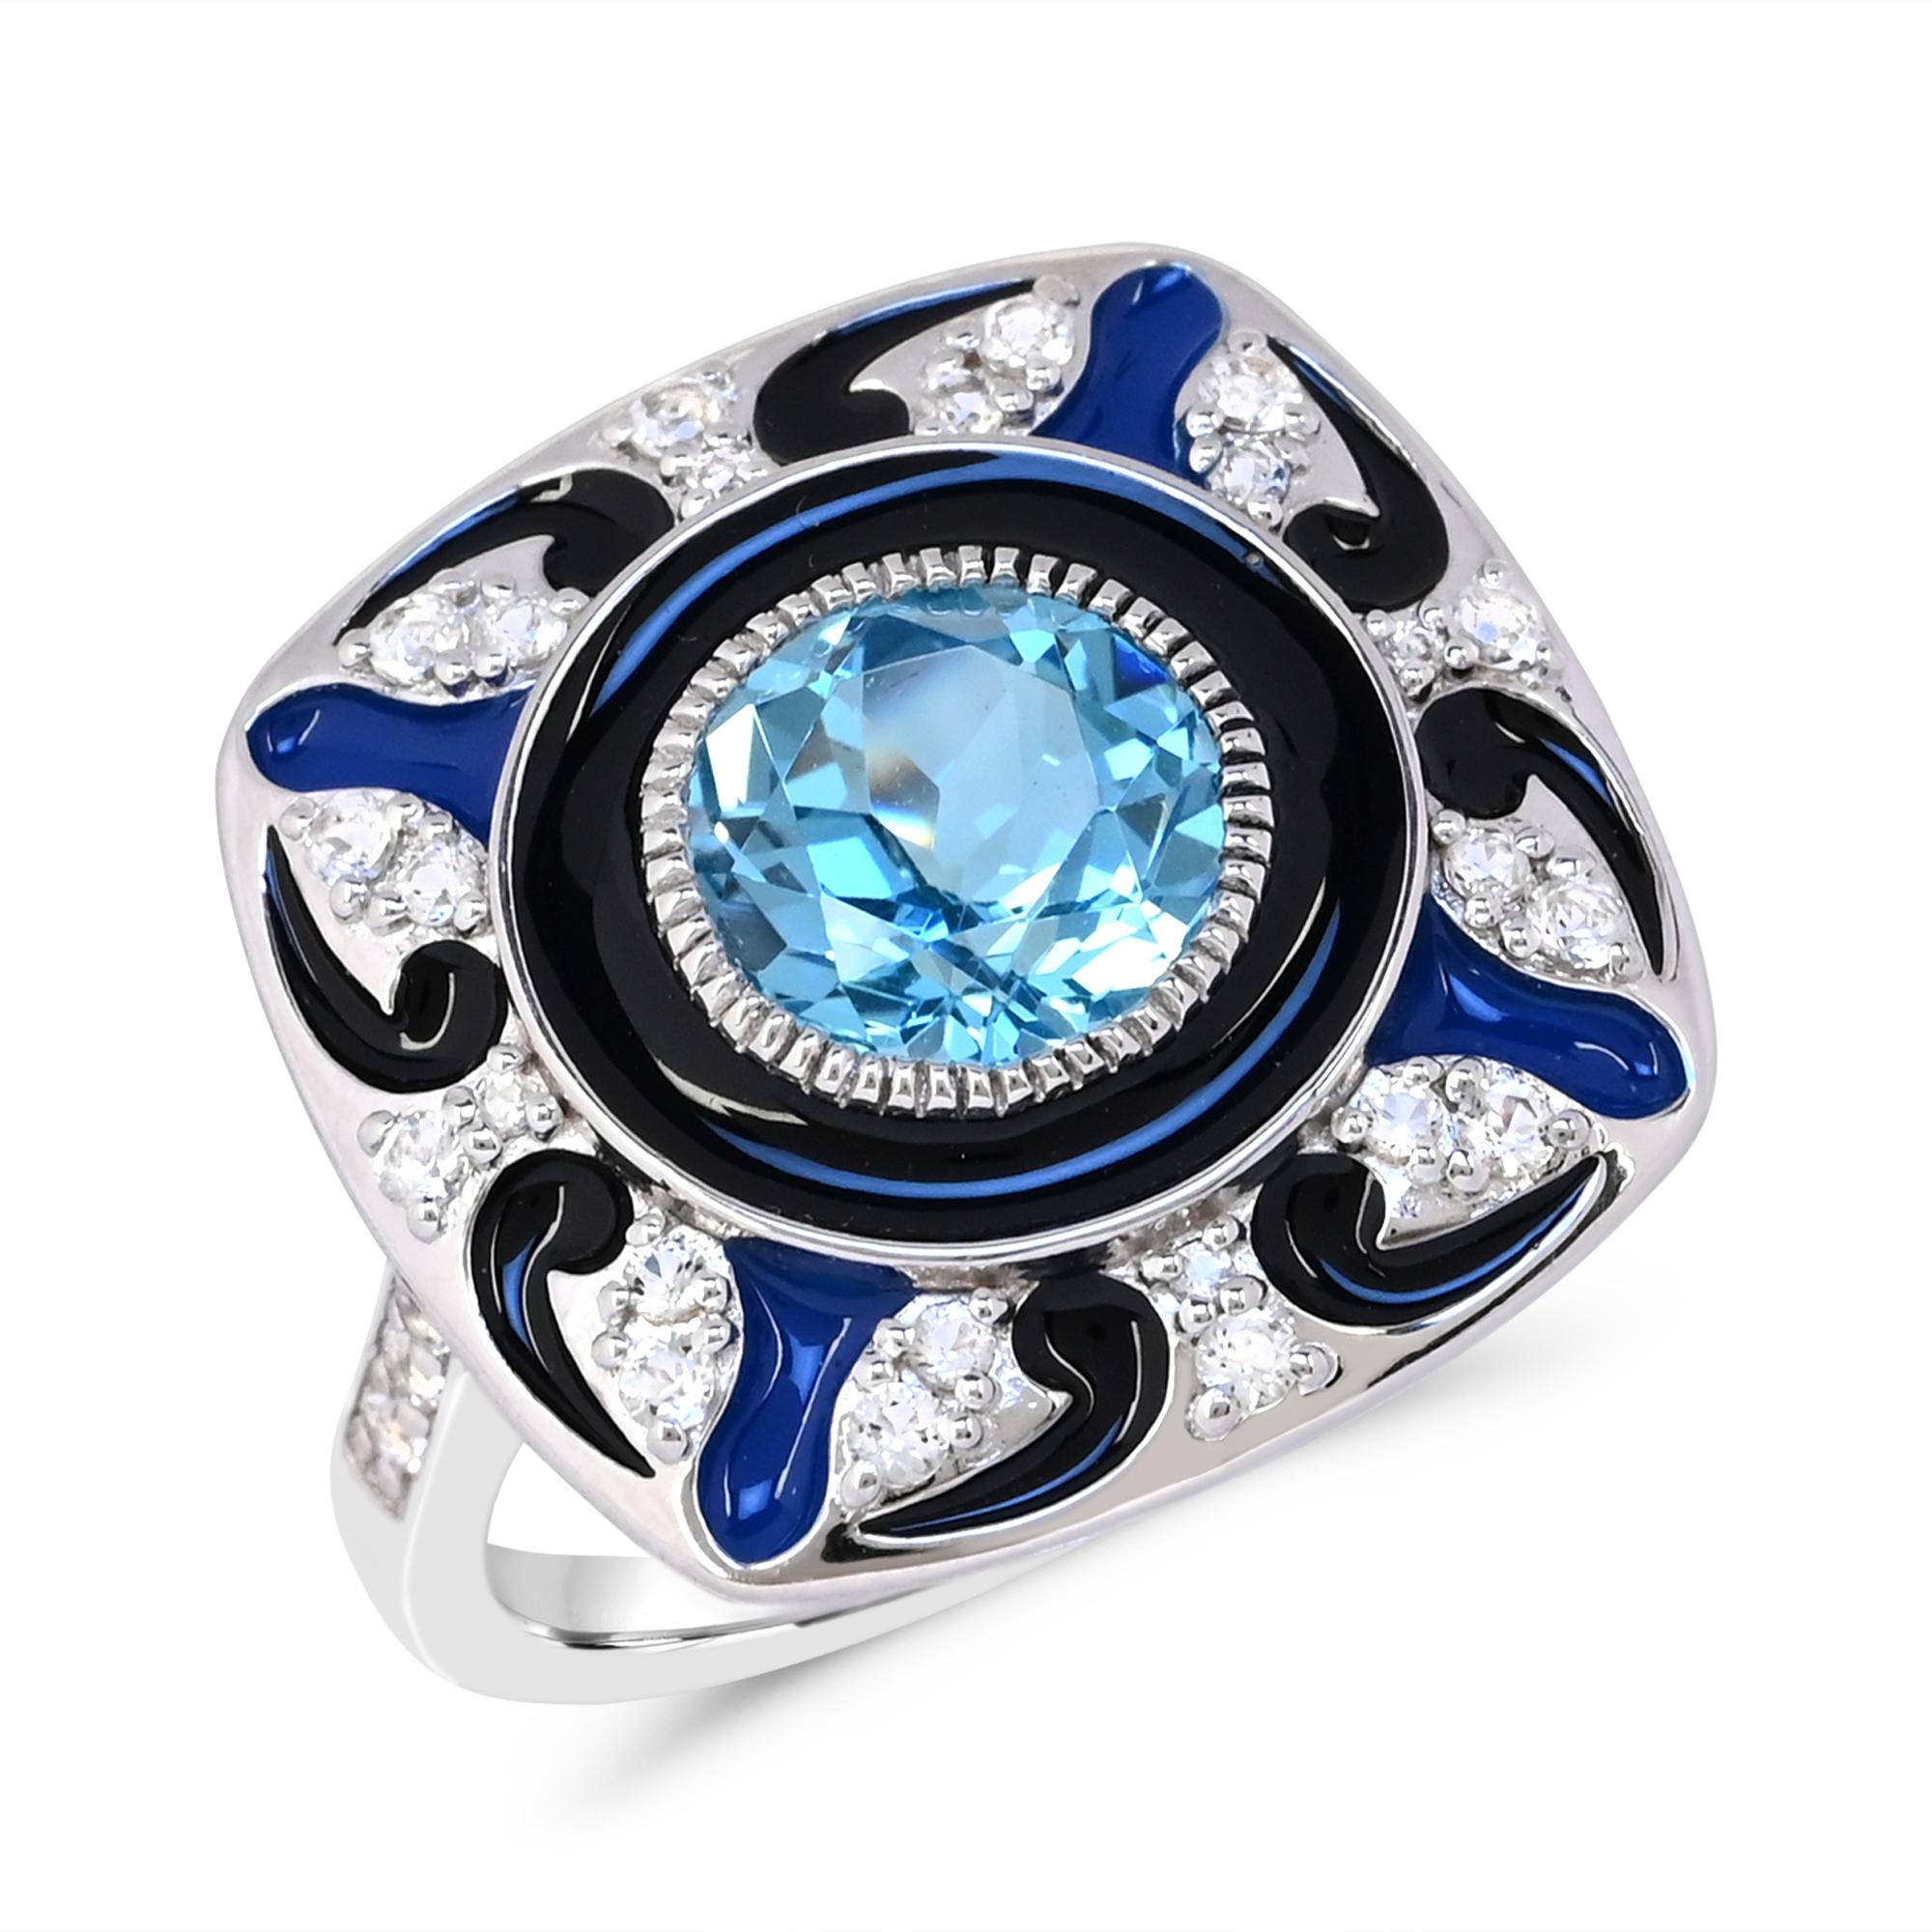 Contemporary 3-1/6 ct. Swiss Blue/White Topaz and Black/Blue Enamel Sterling Silver Ring